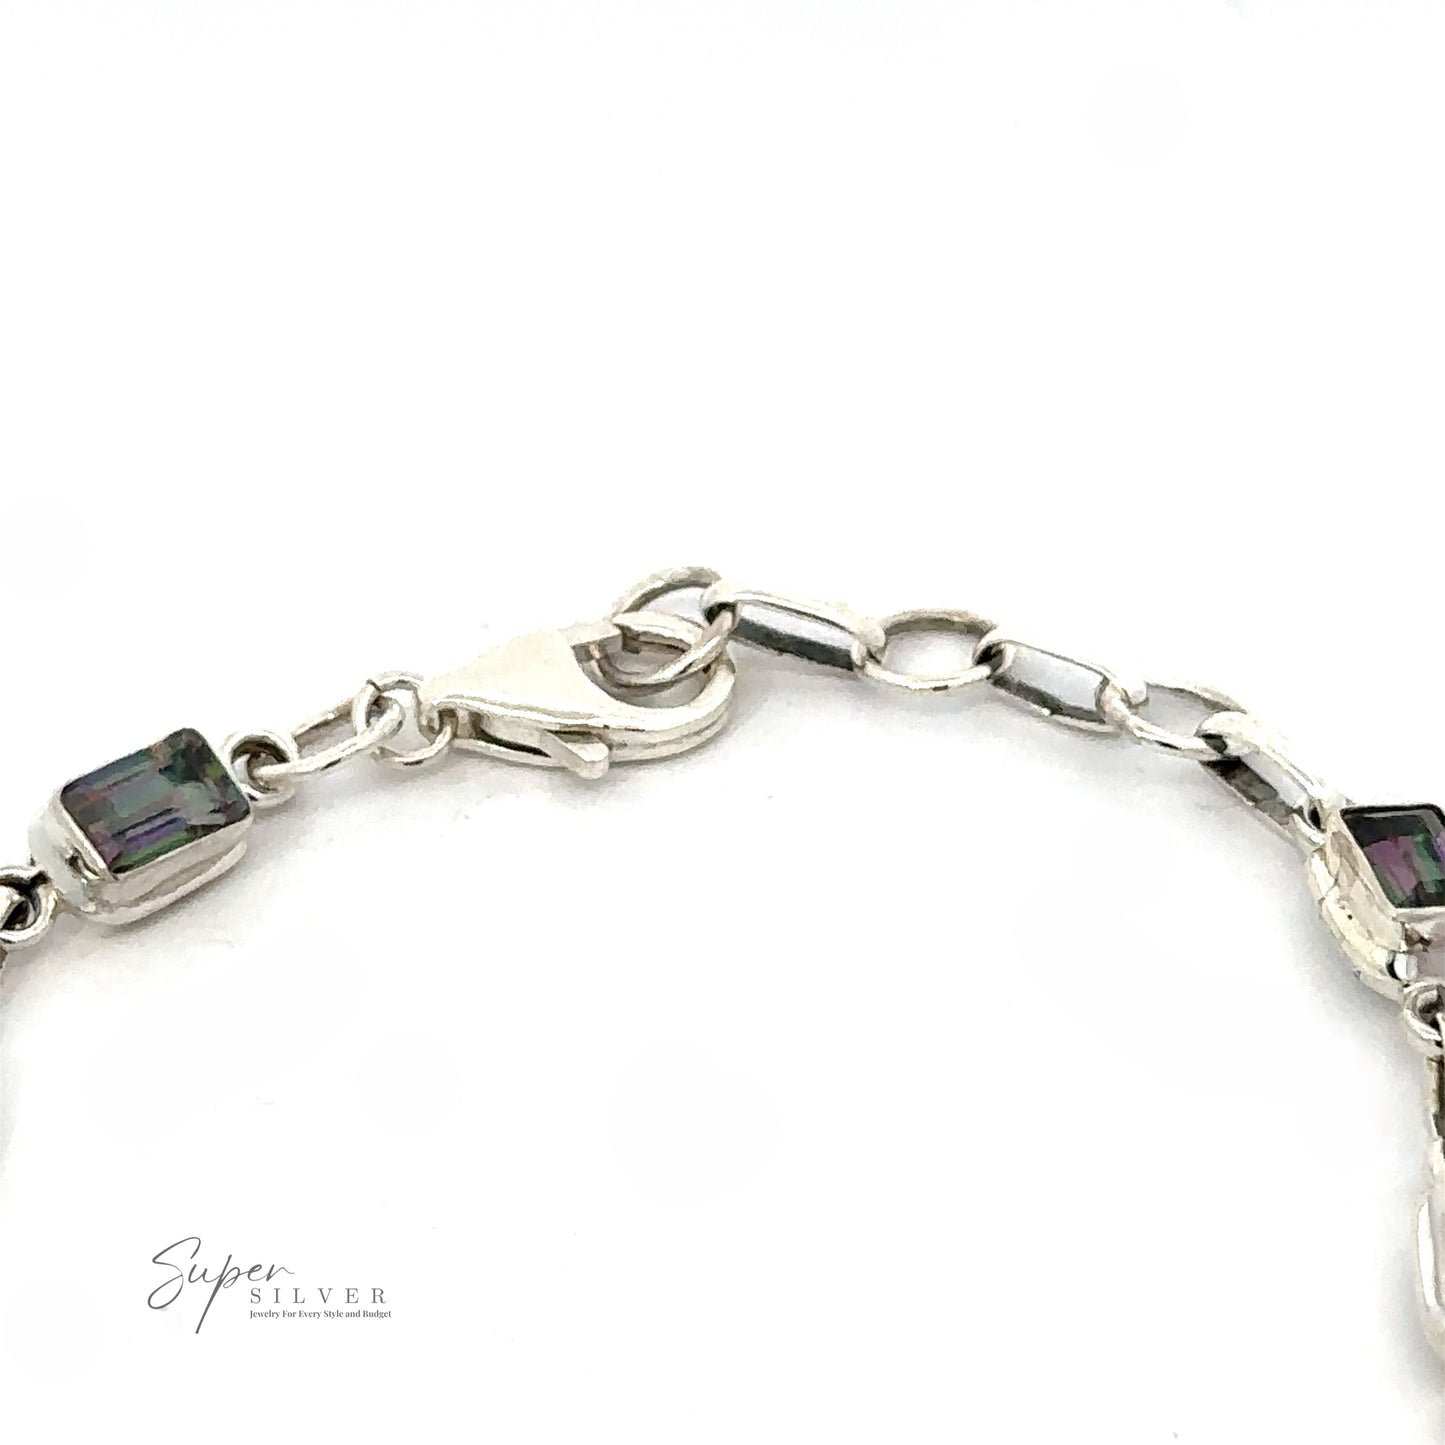 
                  
                    A close-up image of a Rainbow Mystic Topaz Rectangle Link Bracelet featuring a clasp and rectangular gemstones. The image includes the "Super Silver" logo in the bottom left corner.
                  
                